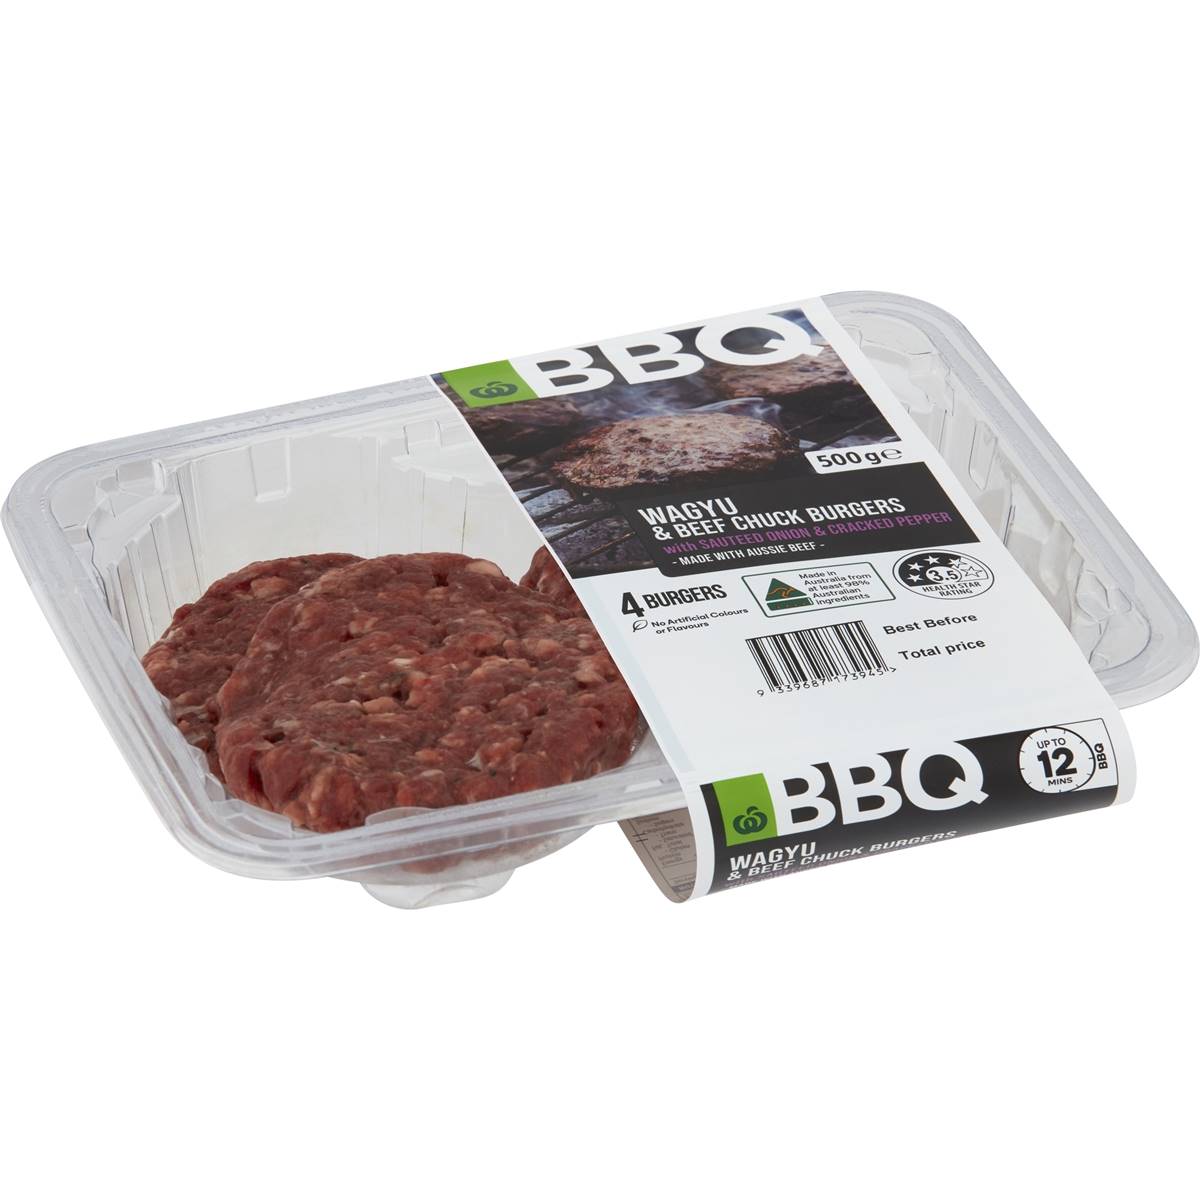 Calories in Woolworths Bbq Wagyu & Beef Chuck Burgers With Onion & Pepper